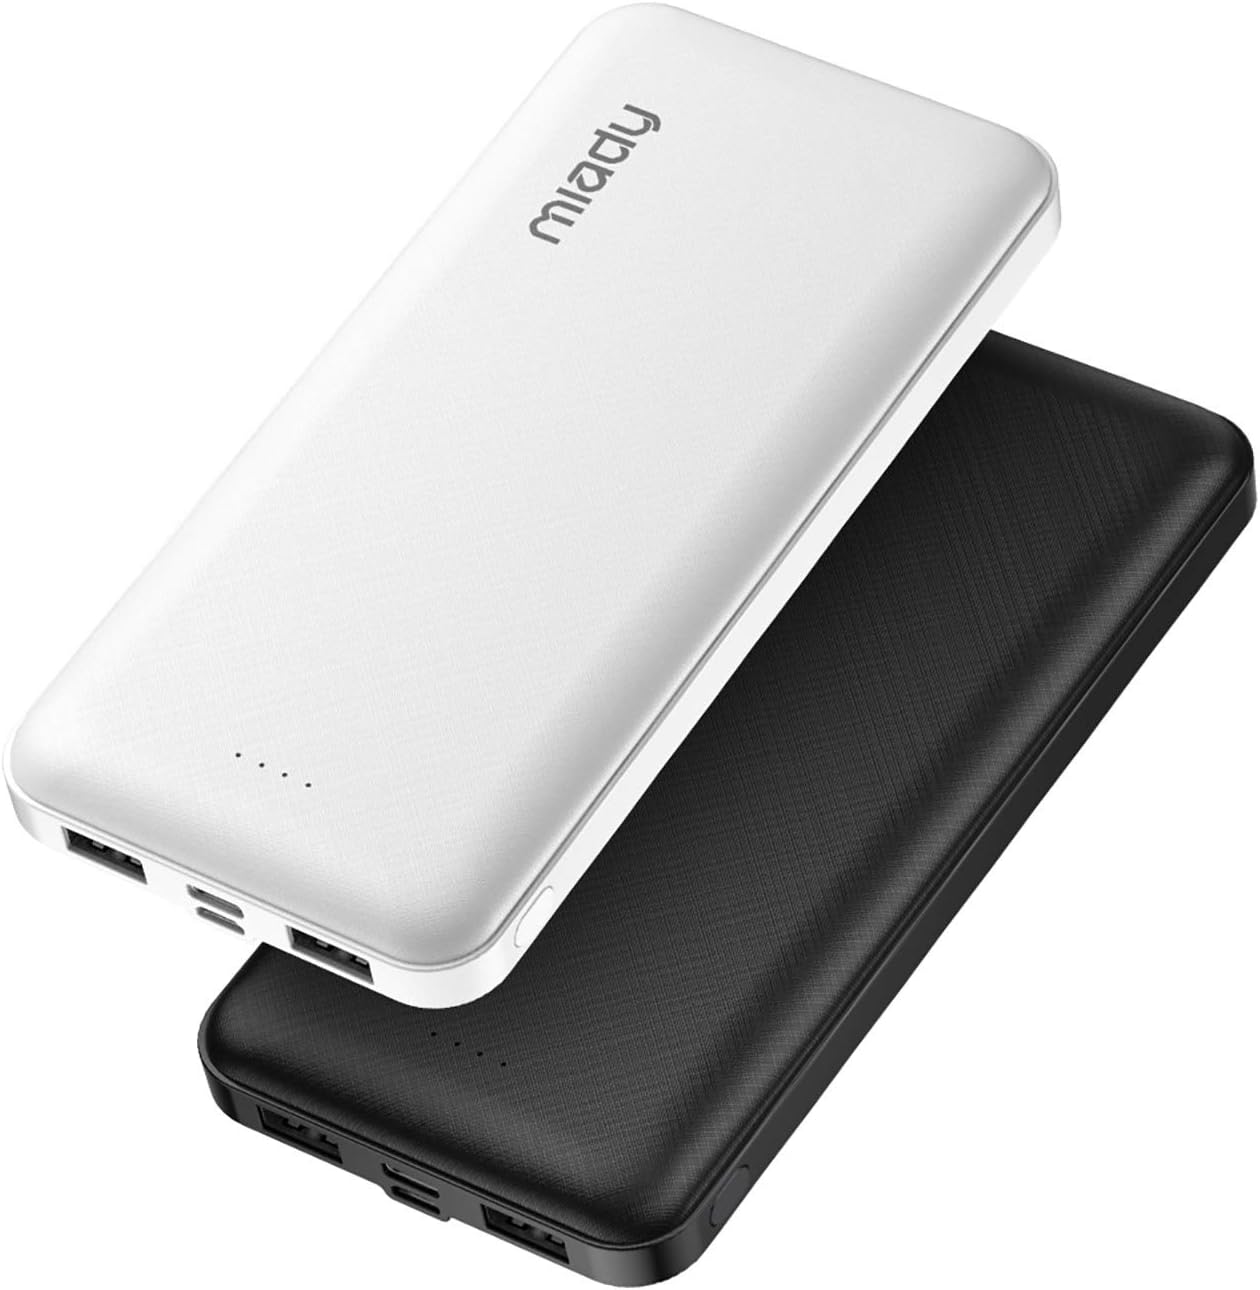 Miady 2-Pack 15000mAh Portable Charger, Power Bank/w Two 5V/2A USB Output Ports and USB C Fast Input, Portable Phone Charger Compatible with iPhones, Android Smartphones and More